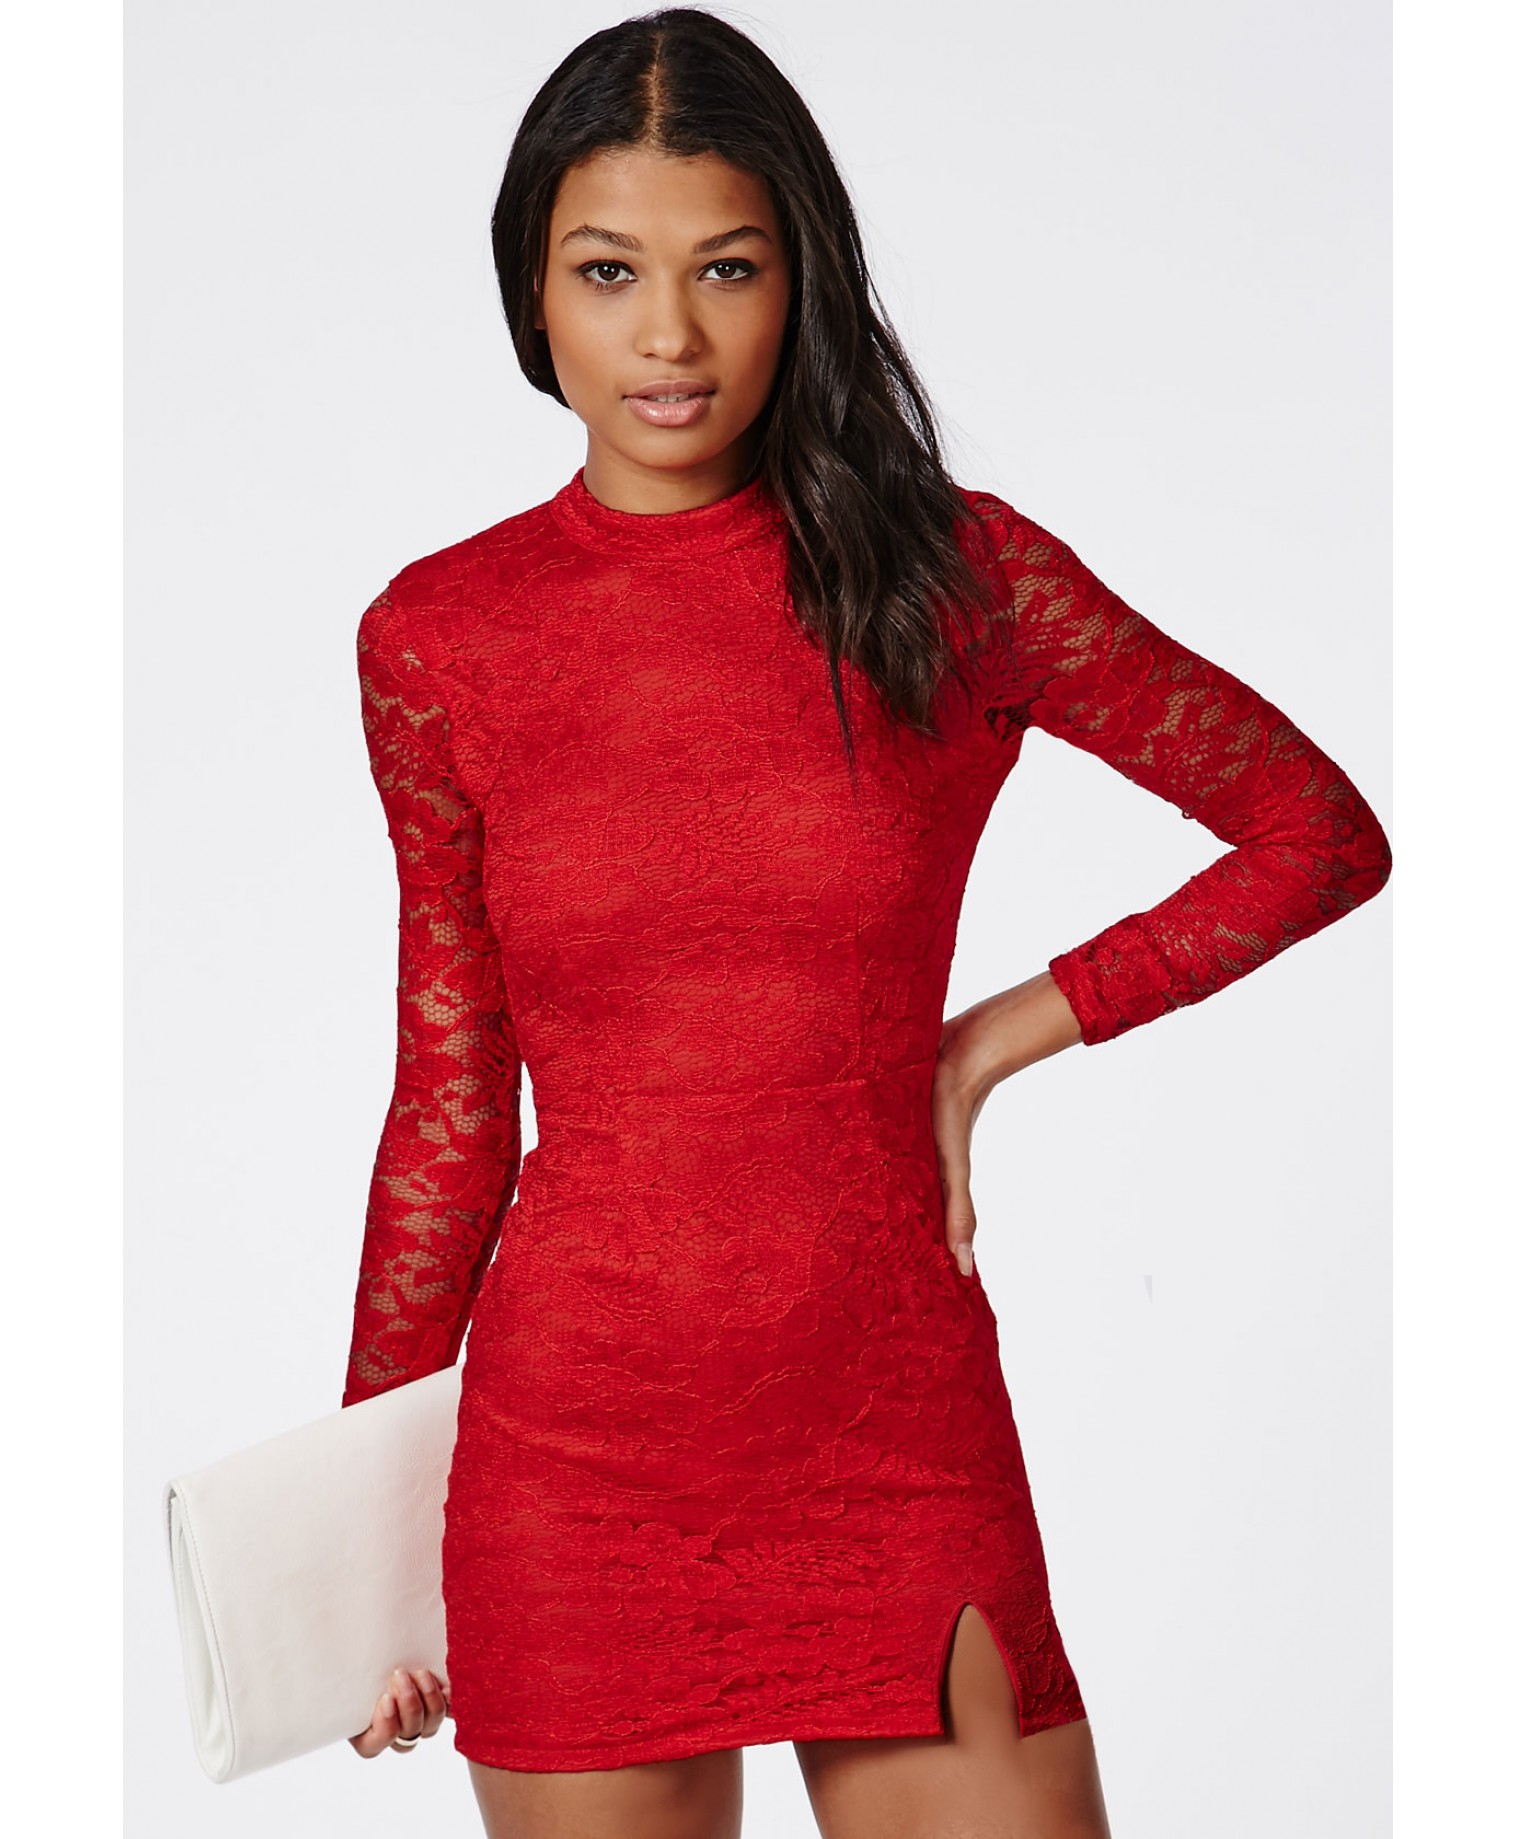 Bodycon dresses long sleeve red lace